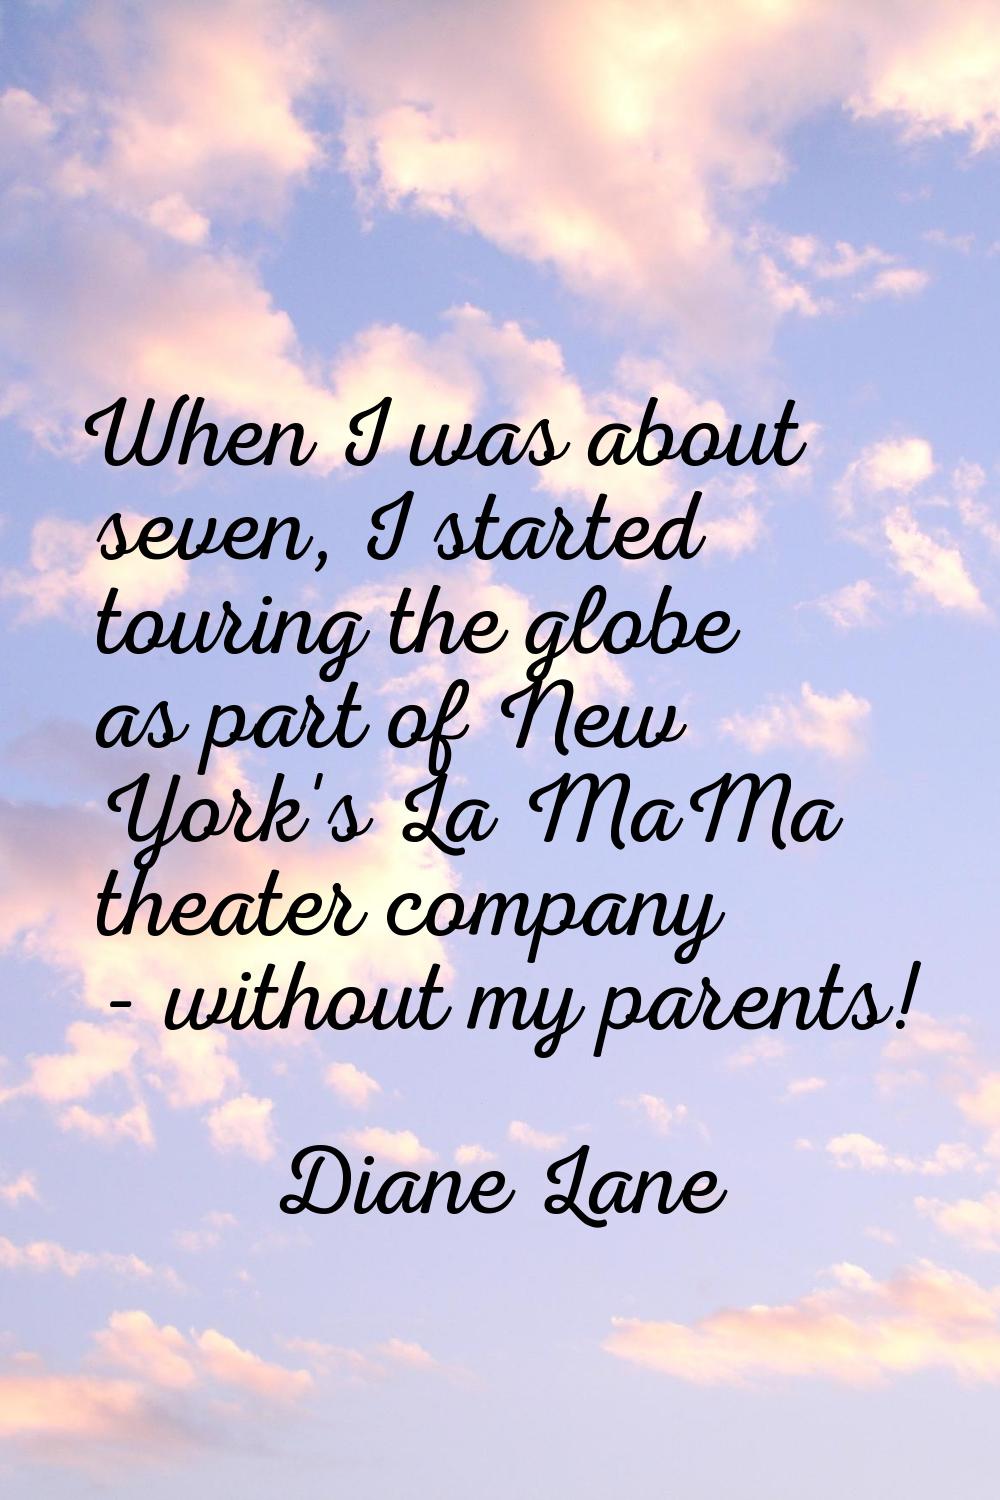 When I was about seven, I started touring the globe as part of New York's La MaMa theater company -